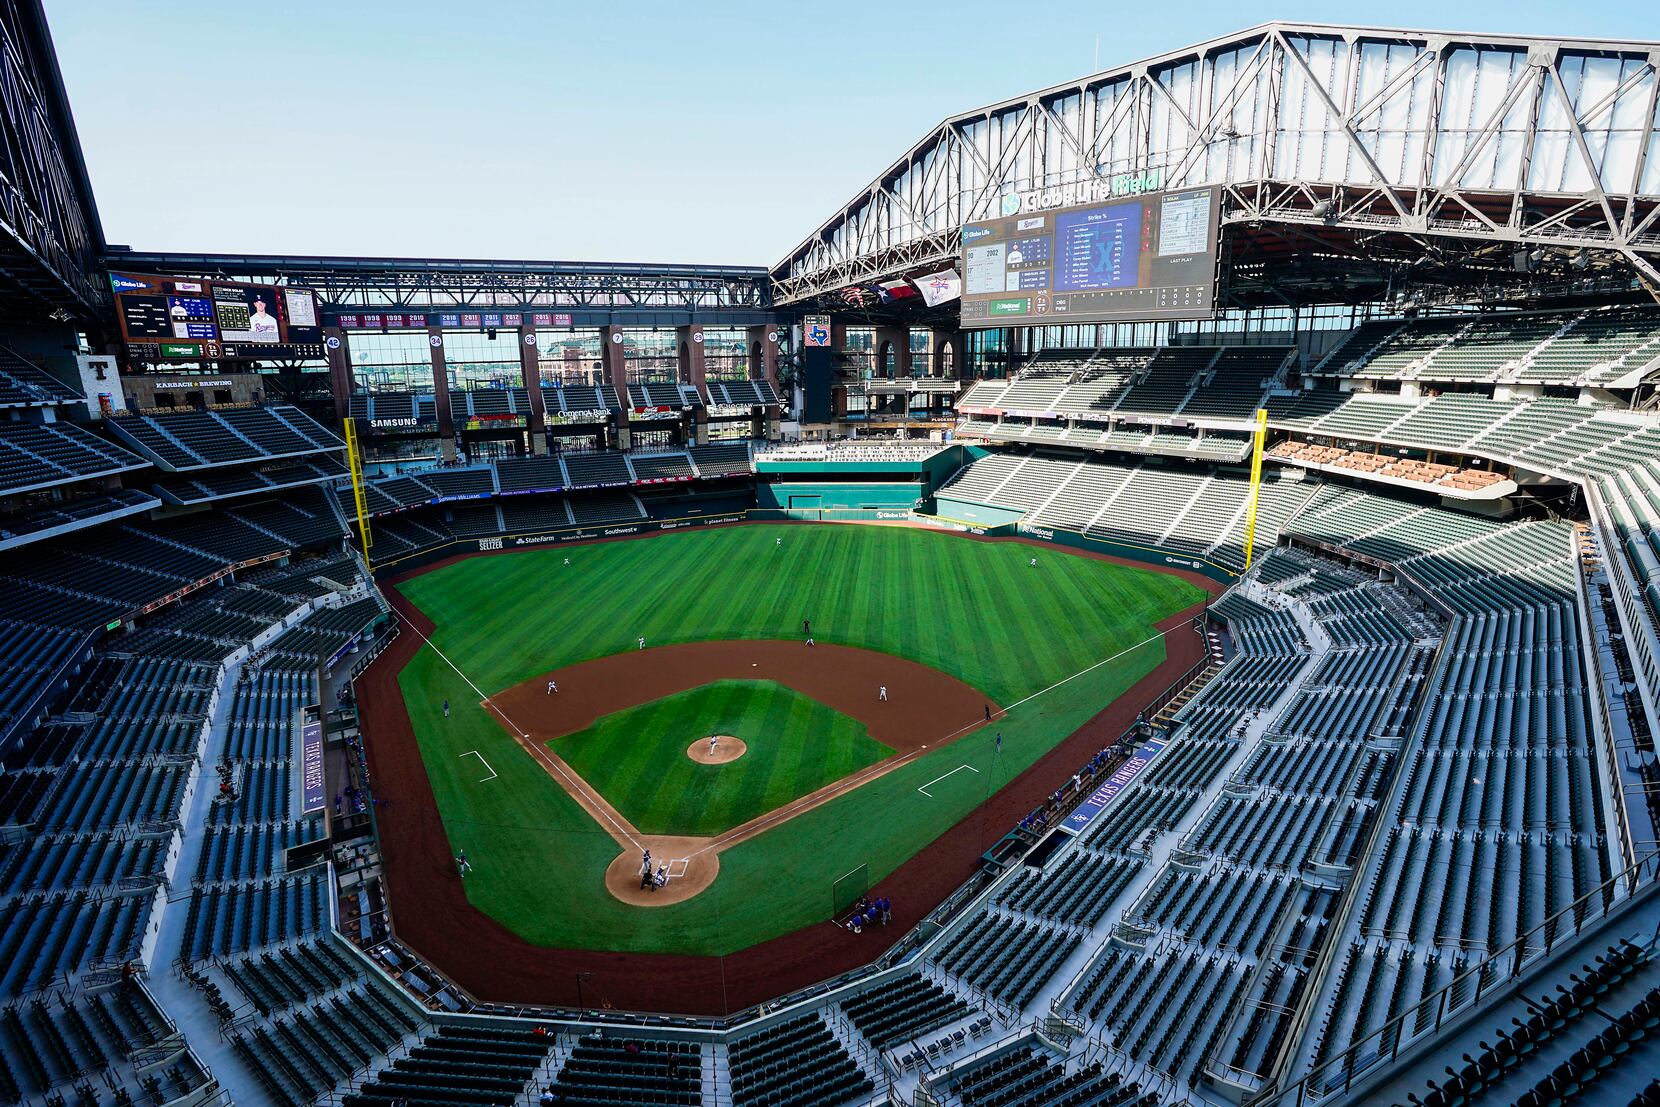 Painted roof deck helps Texas Rangers spot baseball during games